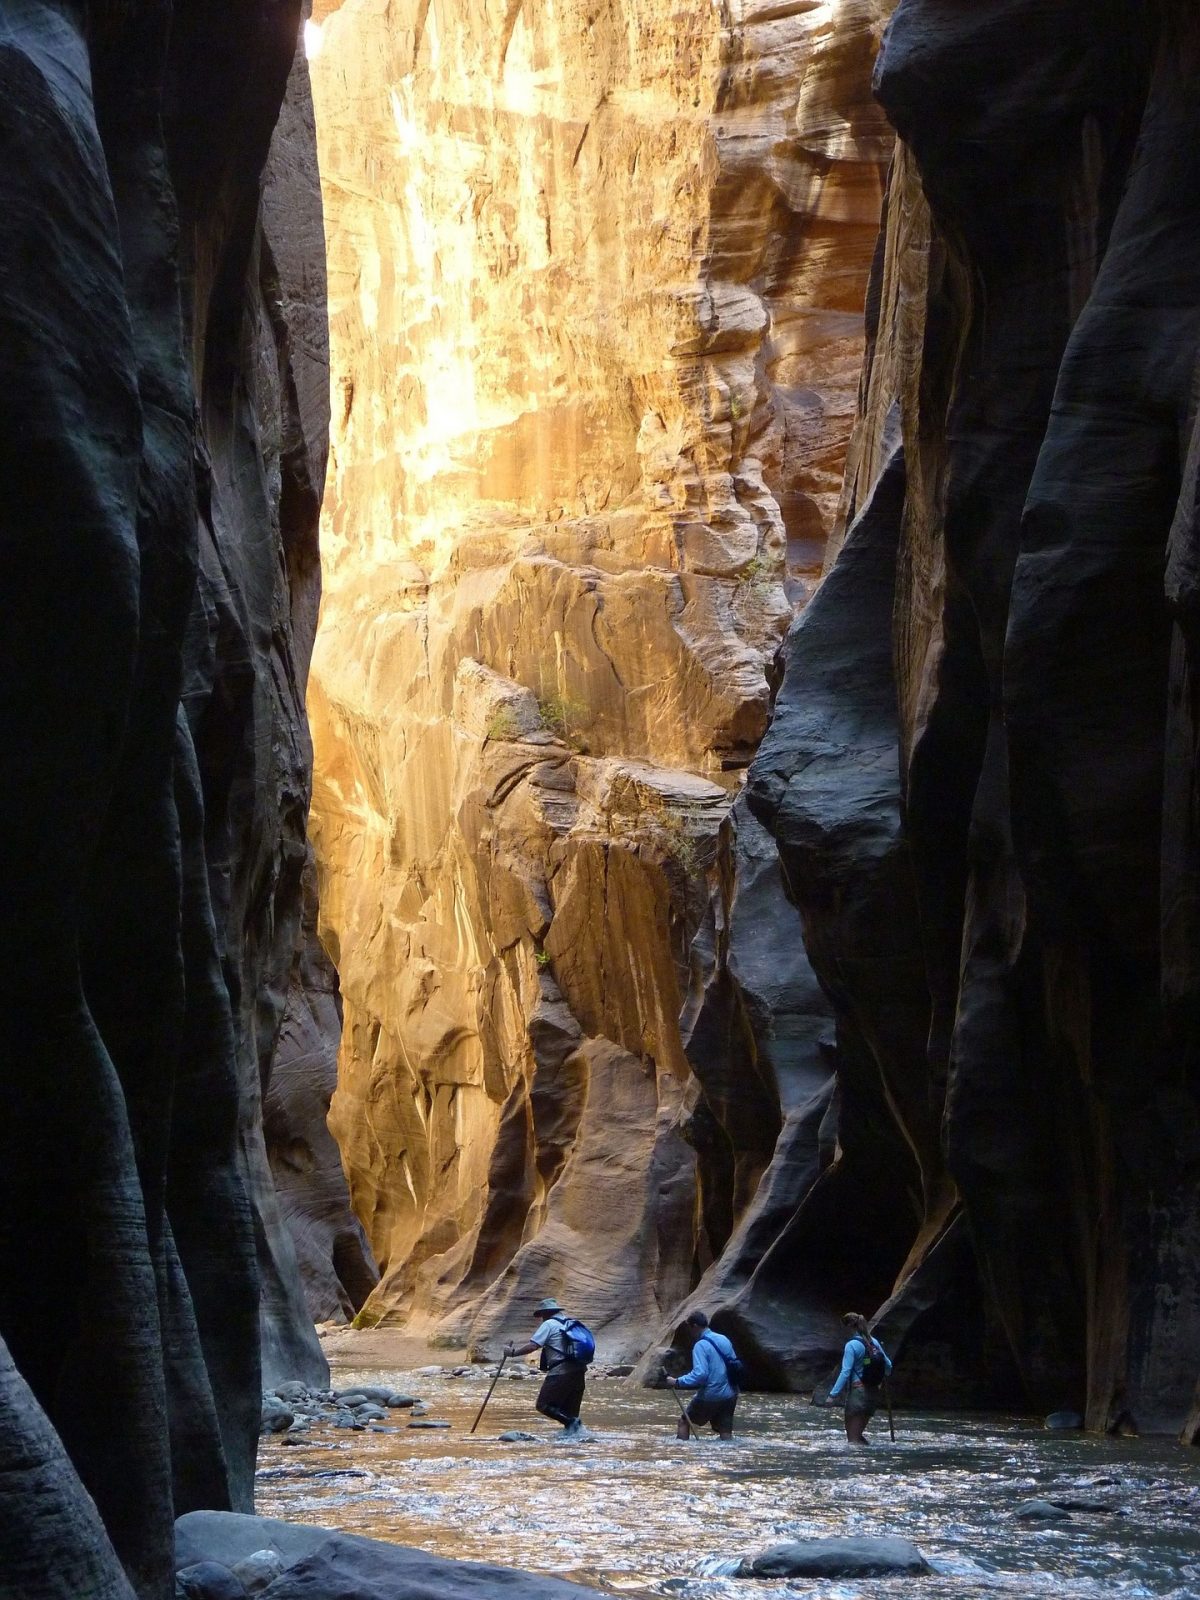 The Narrows trail in Zion National Park. (Public Domain)